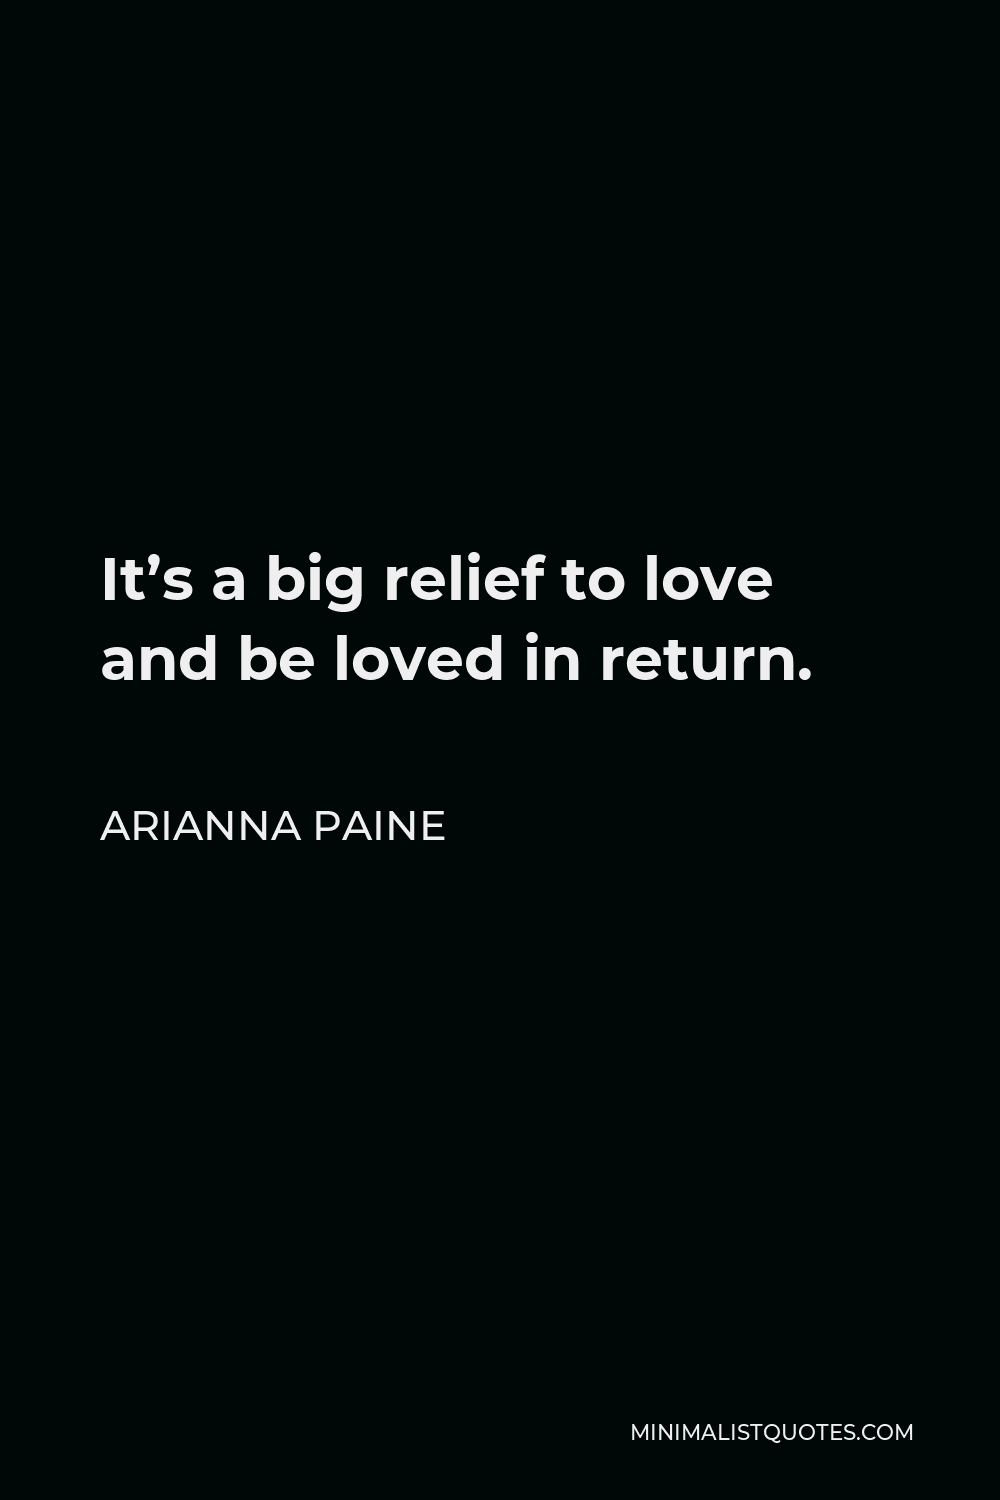 Arianna Paine Quote - It’s a big relief to love and be loved in return.